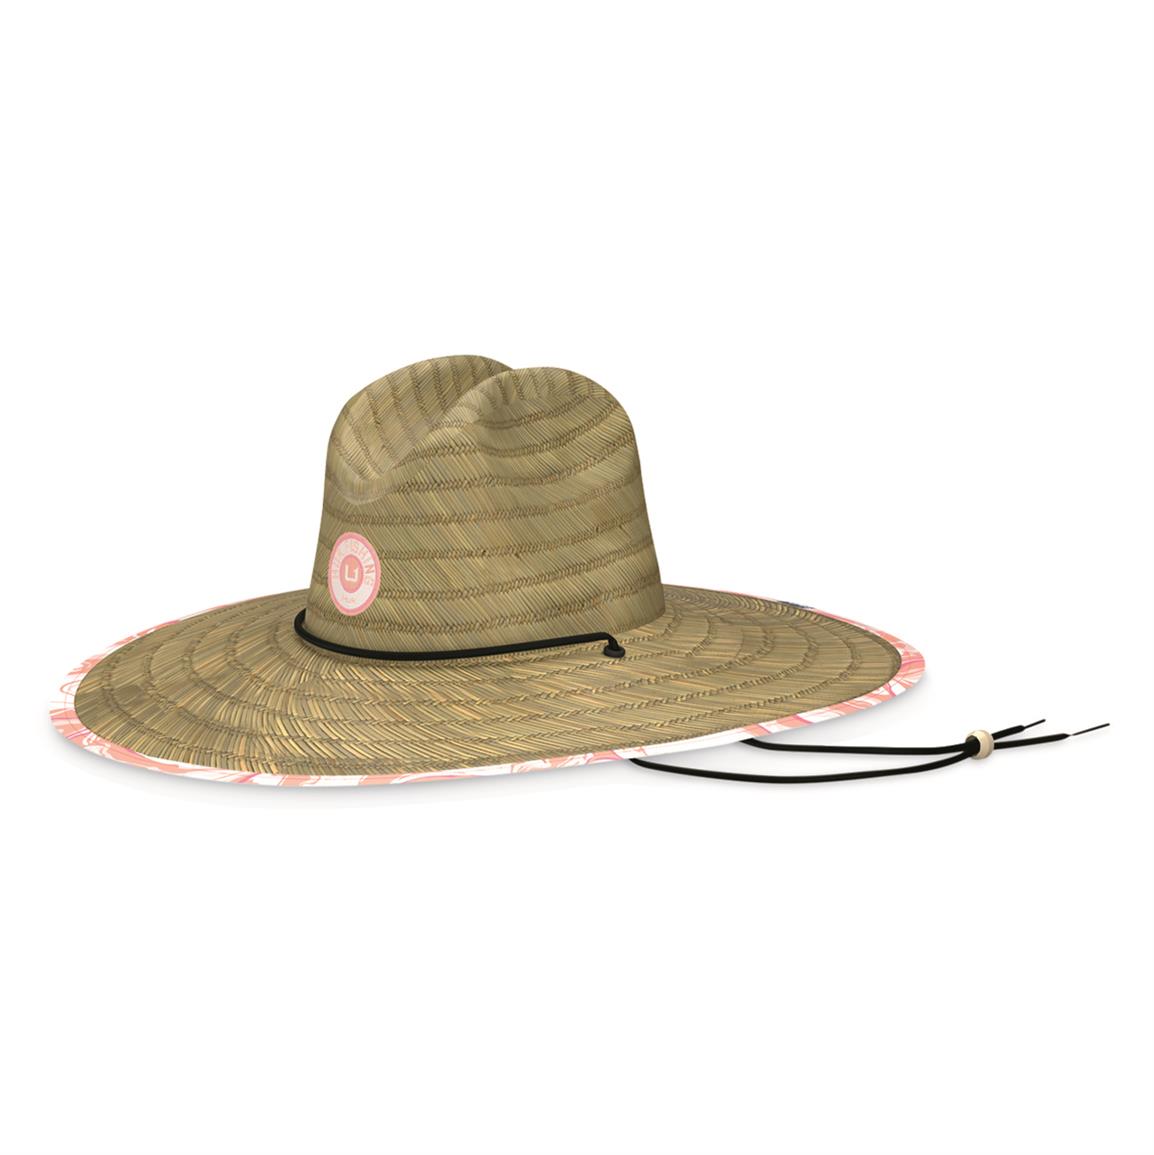 Huk Youth KC Fish & Flag Straw Hat - 736492, Kid's Accessories at